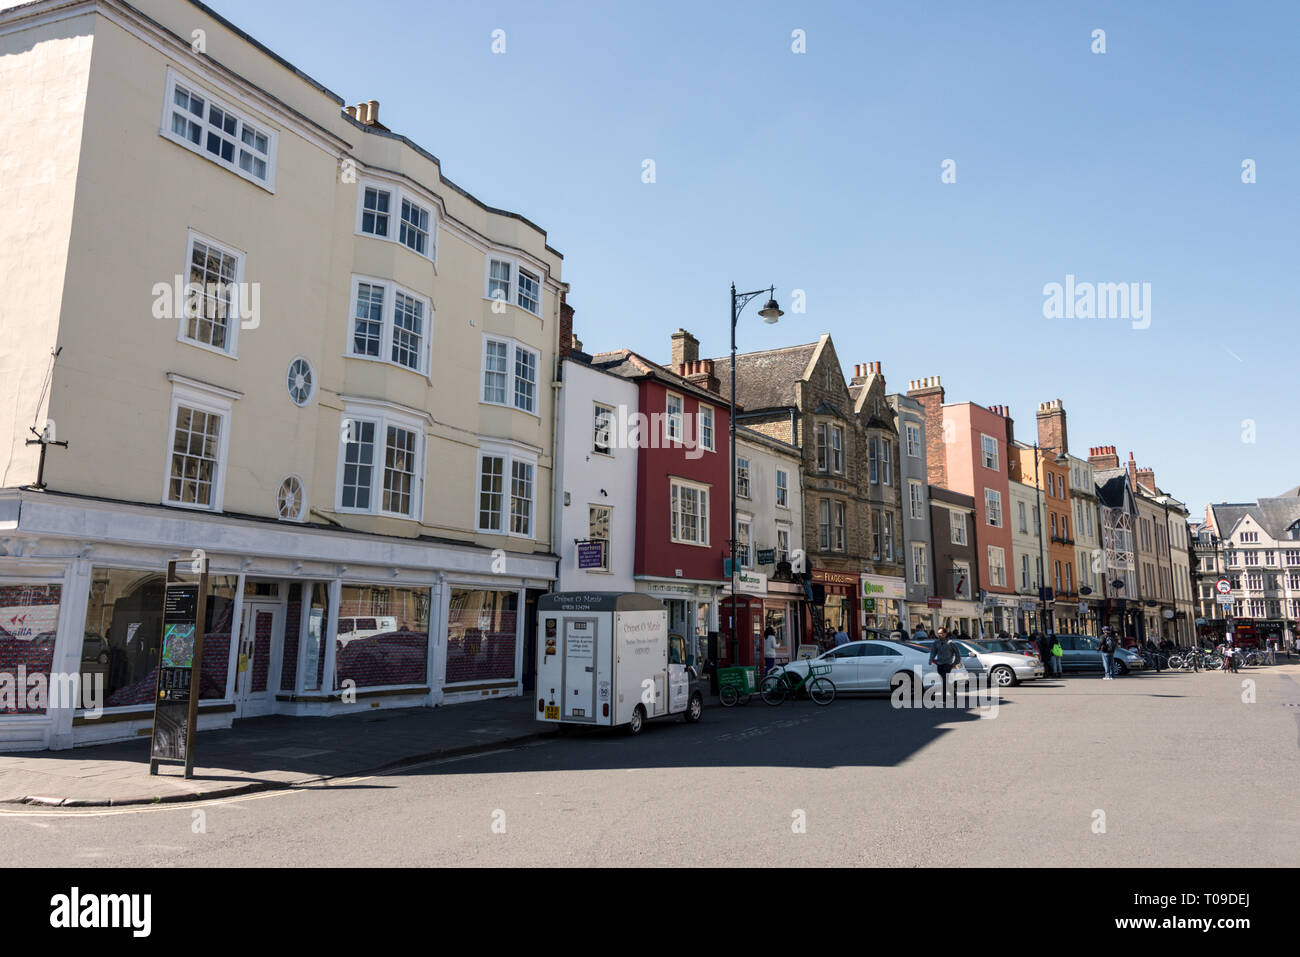 A row of shops and eateries on Broad Street  in Oxford, Oxfordshire,Britain Stock Photo